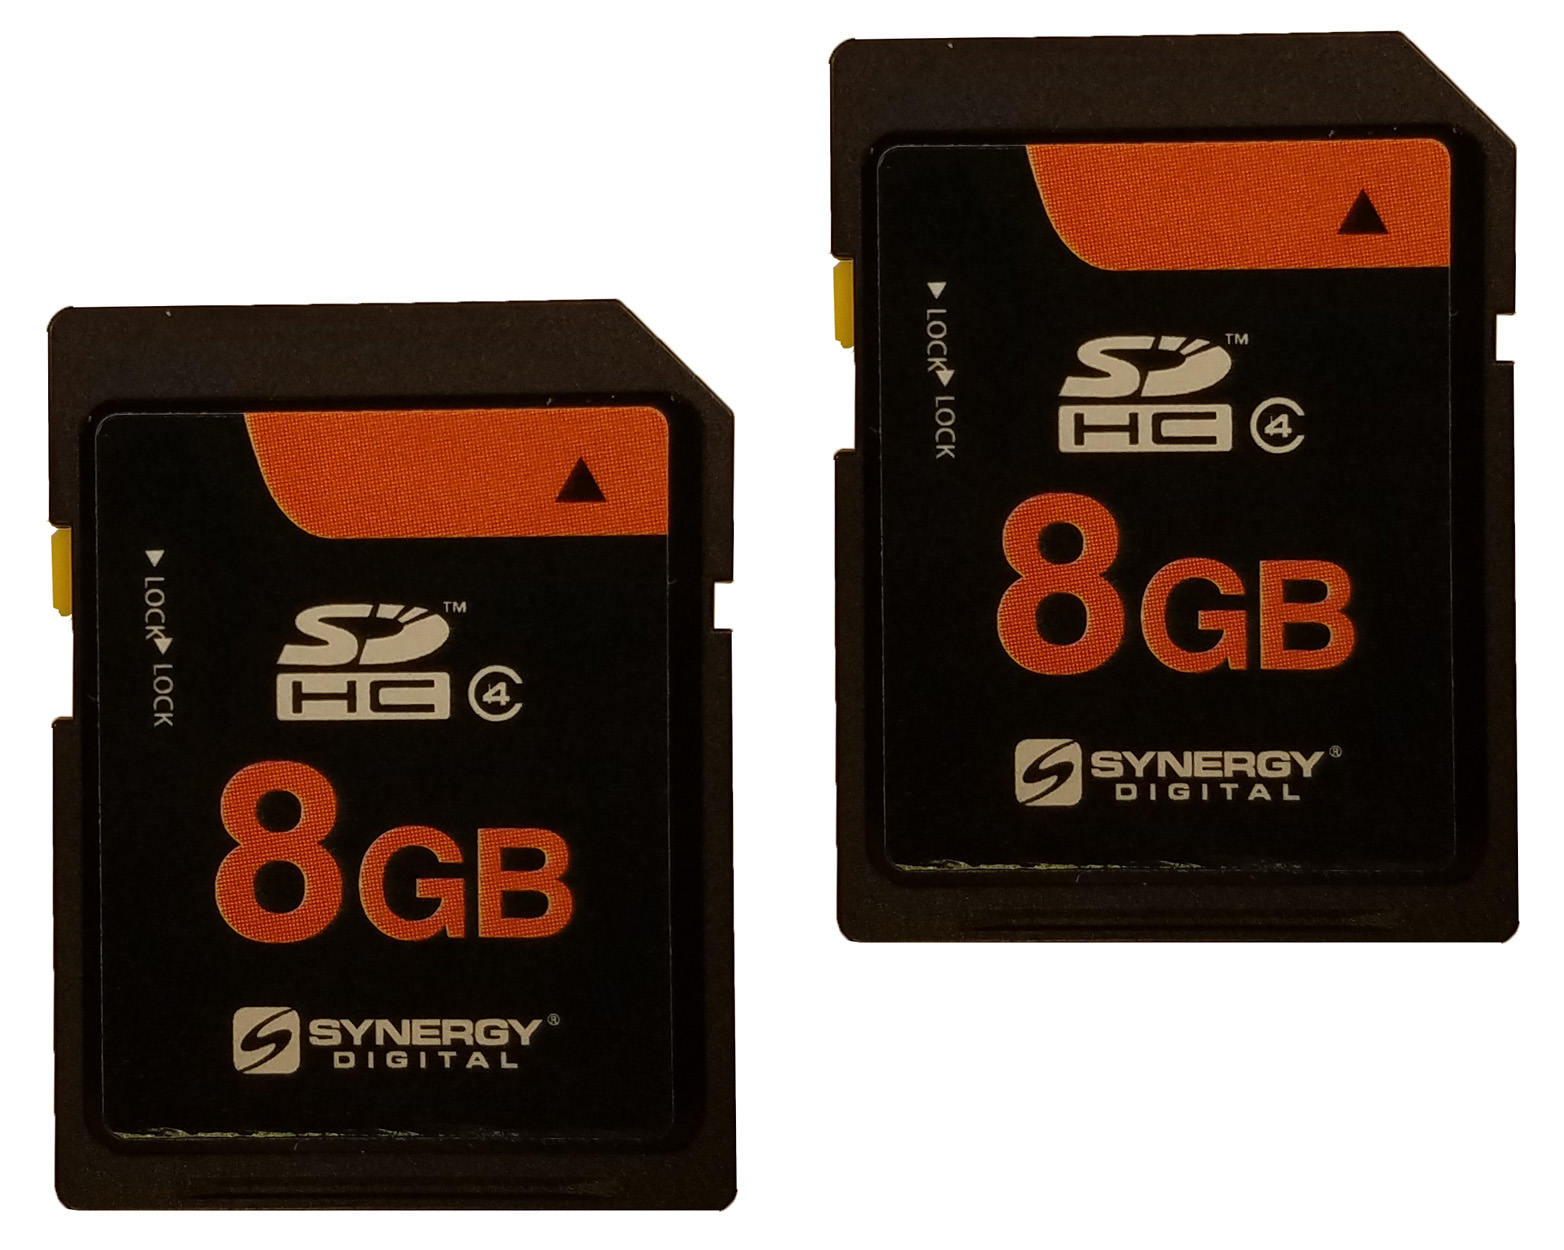 2 x 8GB Secure Digital High Capacity (SDHC) Memory Cards (2 Pack)